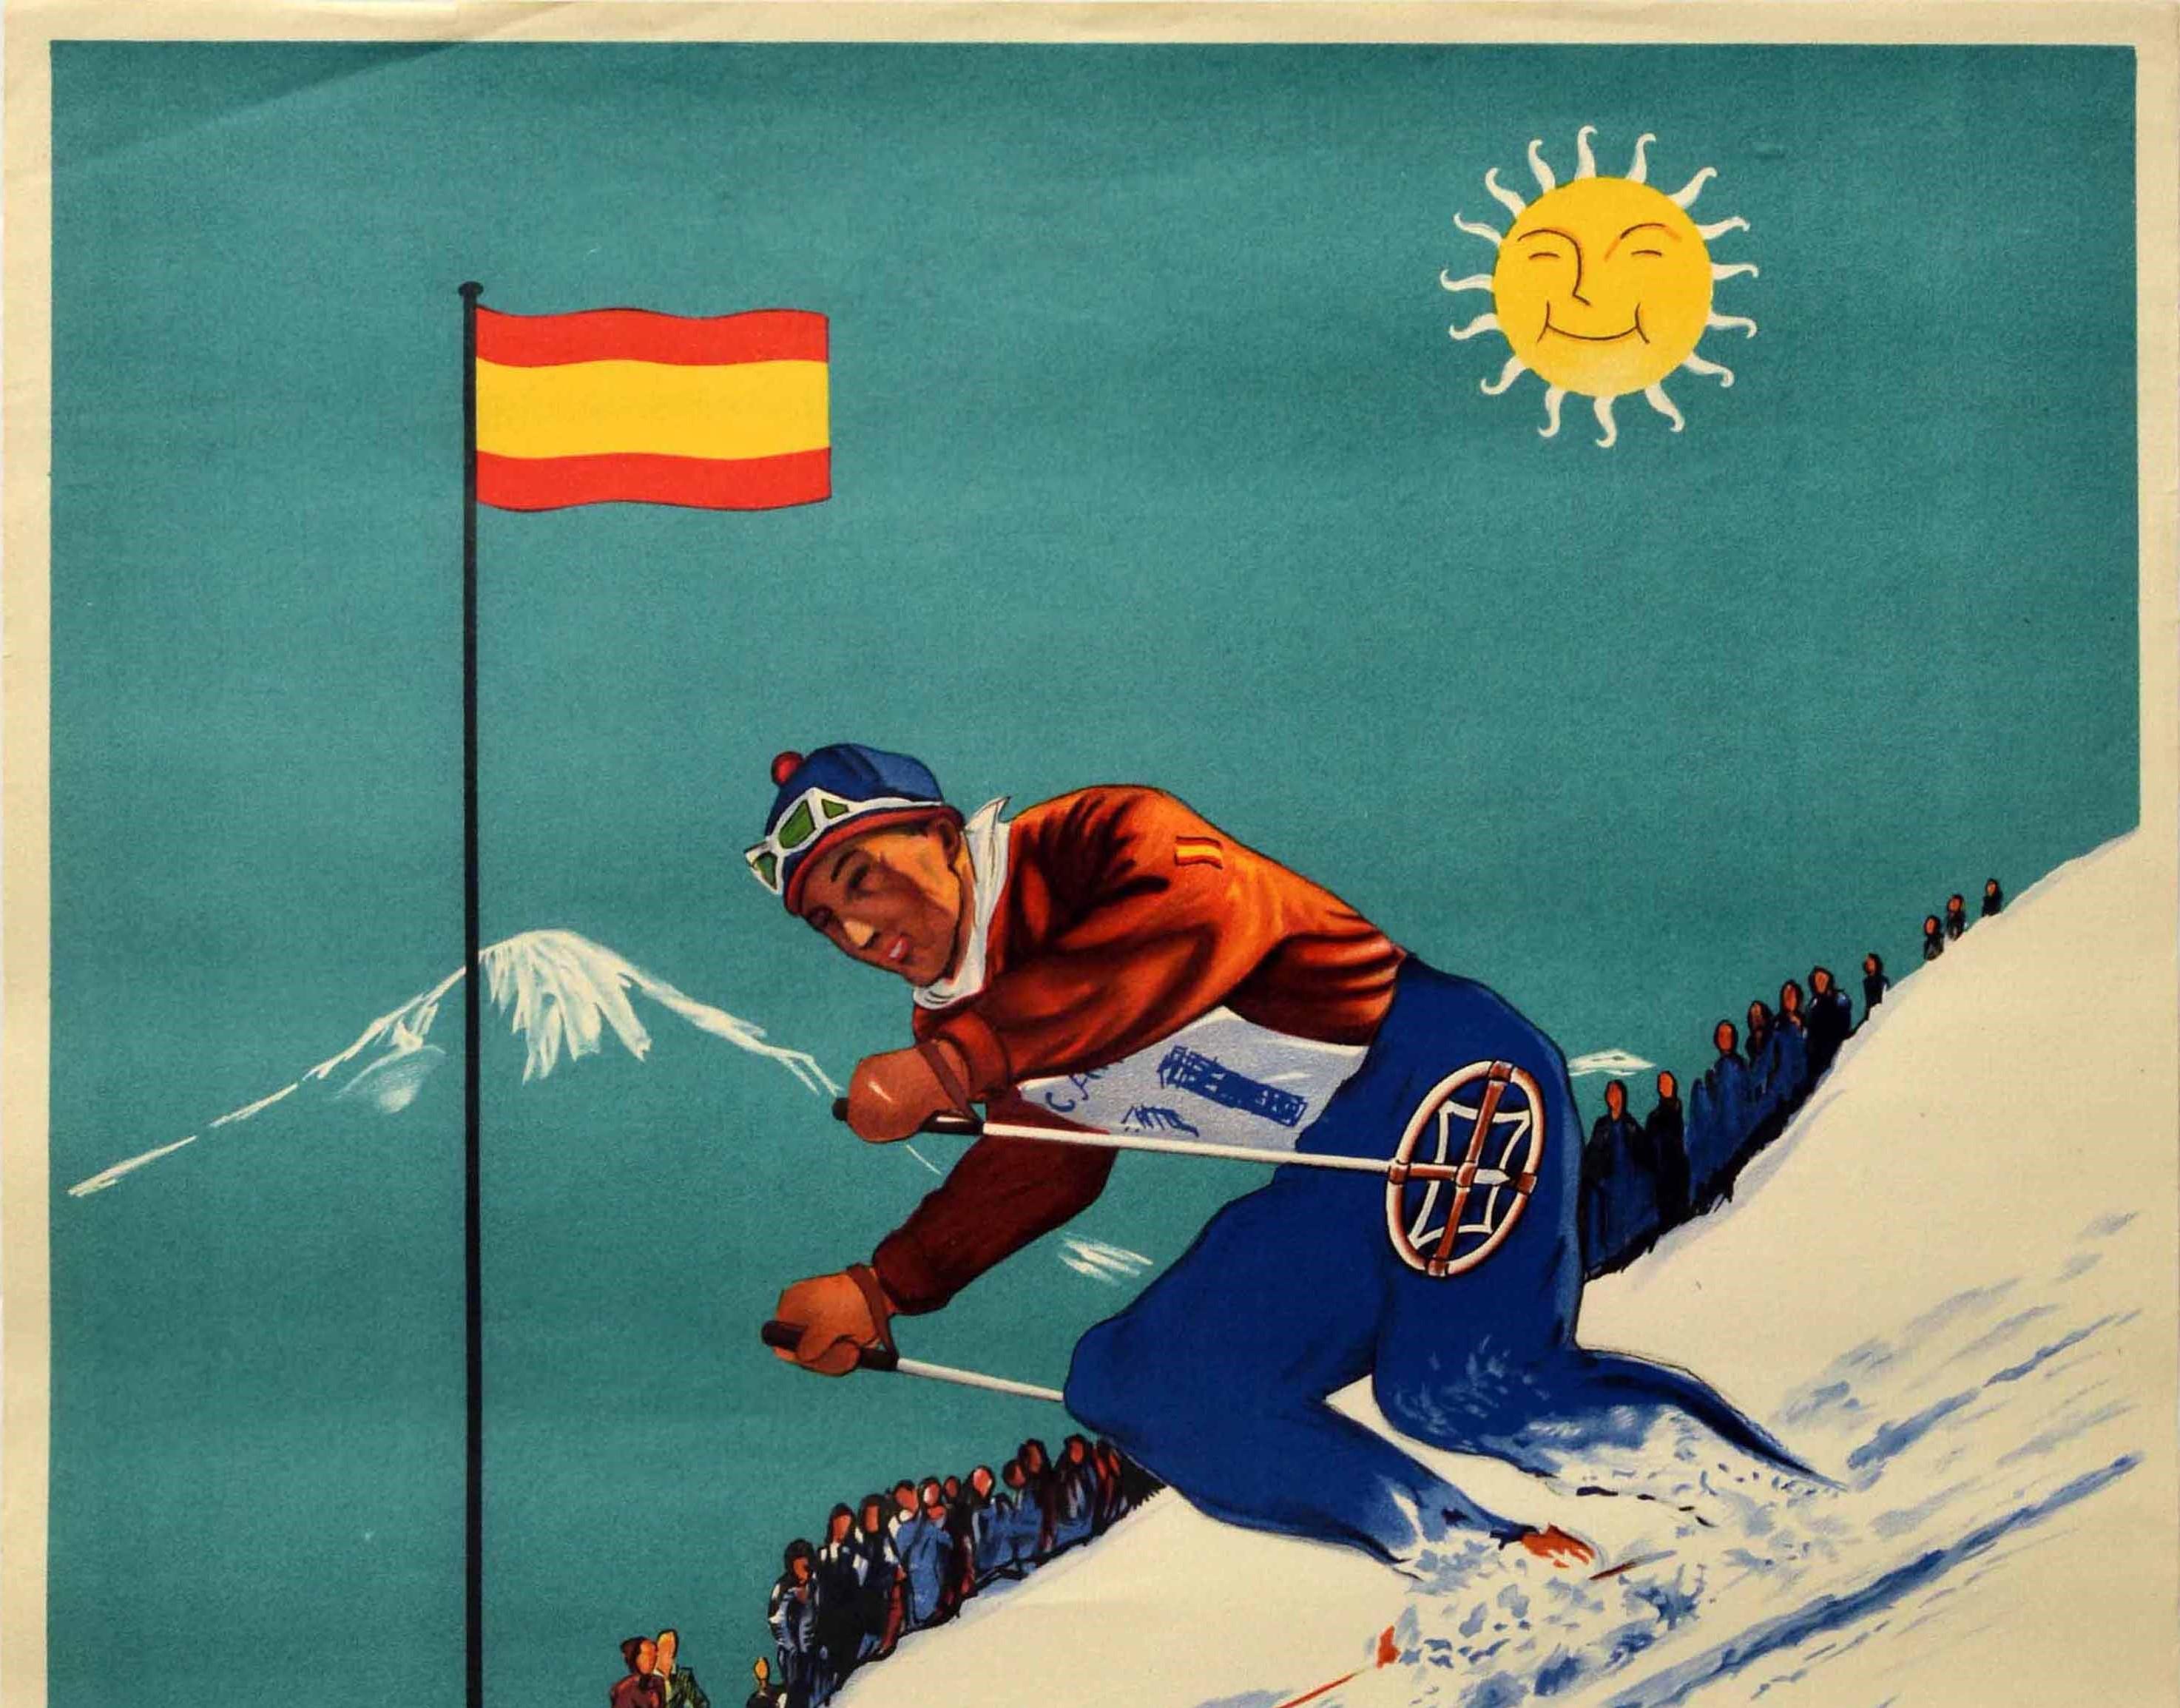 Original vintage winter sport alpine ski resort poster featuring a skier in red and blue skiing at speed down a snowy piste past a red and yellow flag of Spain flying over spectators with a snow topped mountain visible in the distance below a